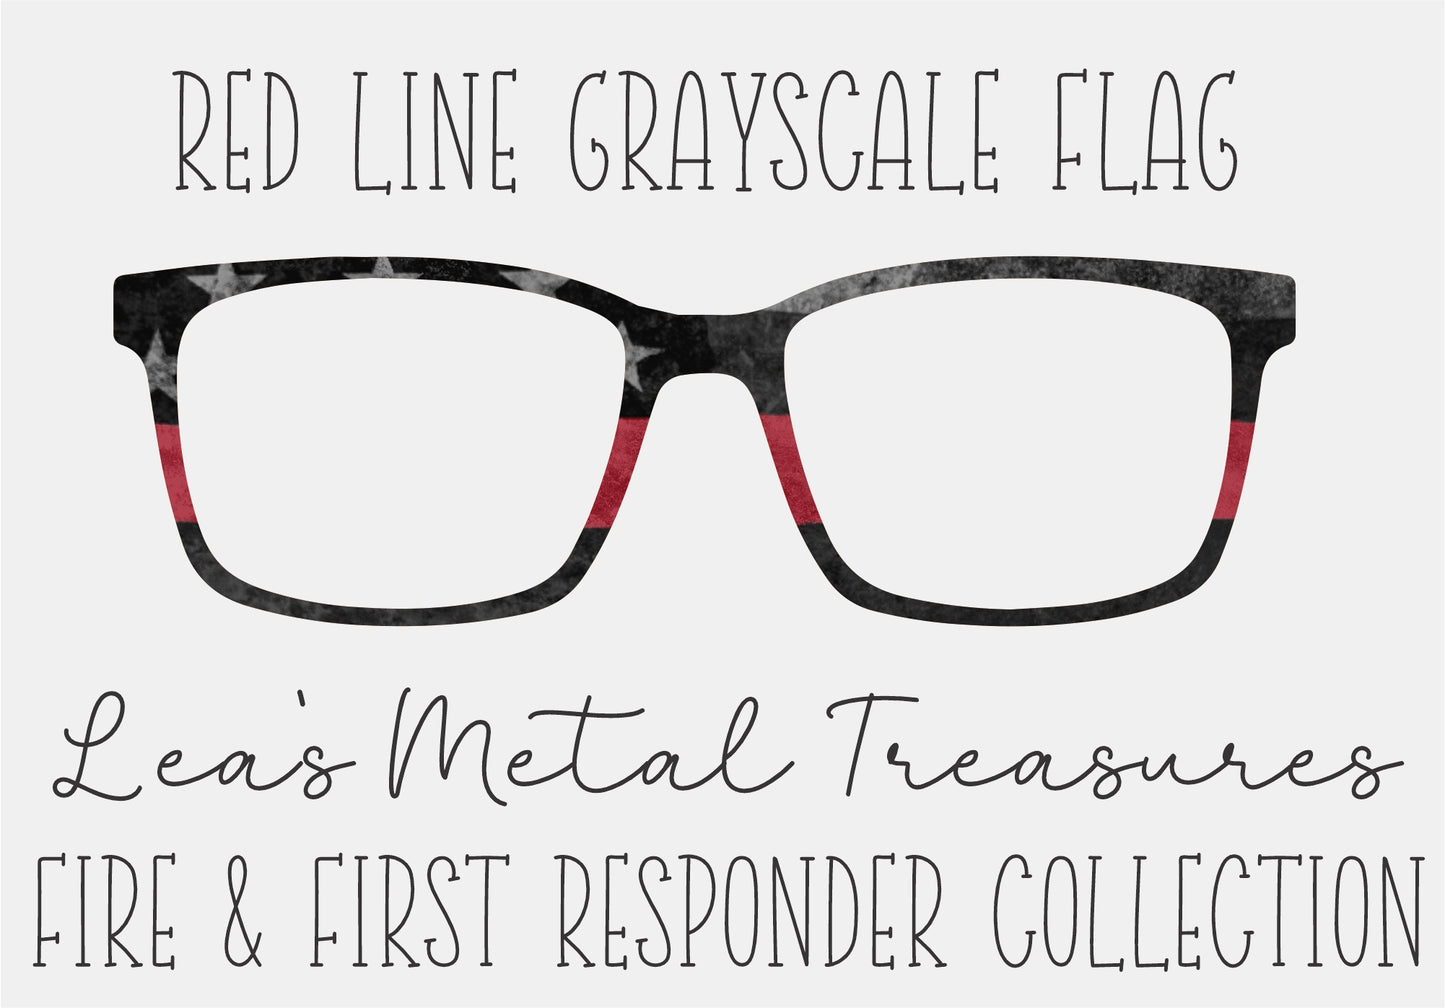 Red Line Grayscale Flag Eyewear Frame Toppers COMES WITH MAGNETS